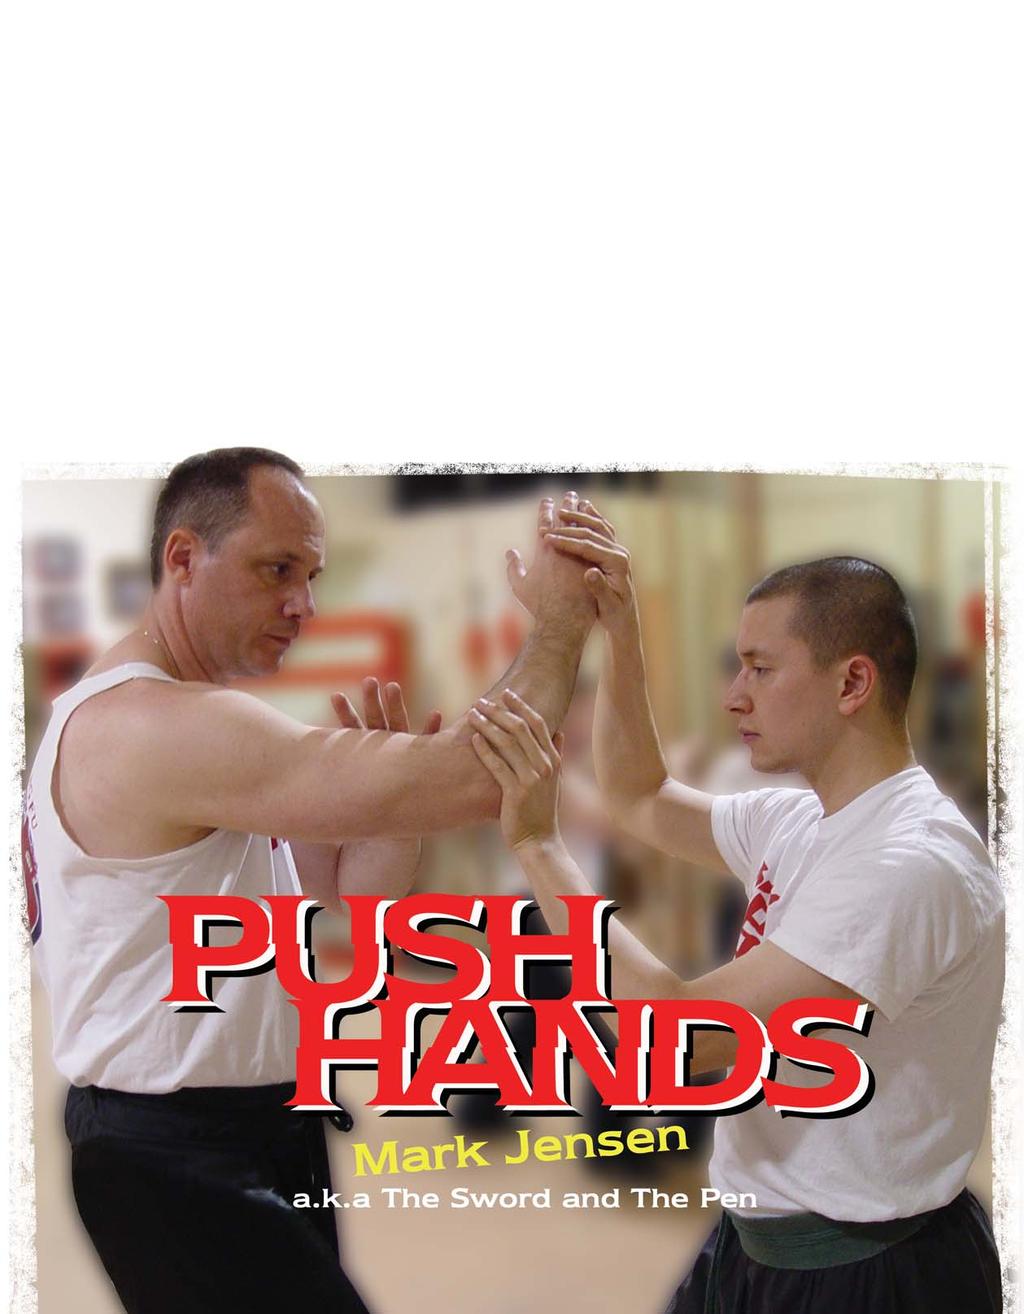 T he flyer on the wall of our school said "Push Hands Class".